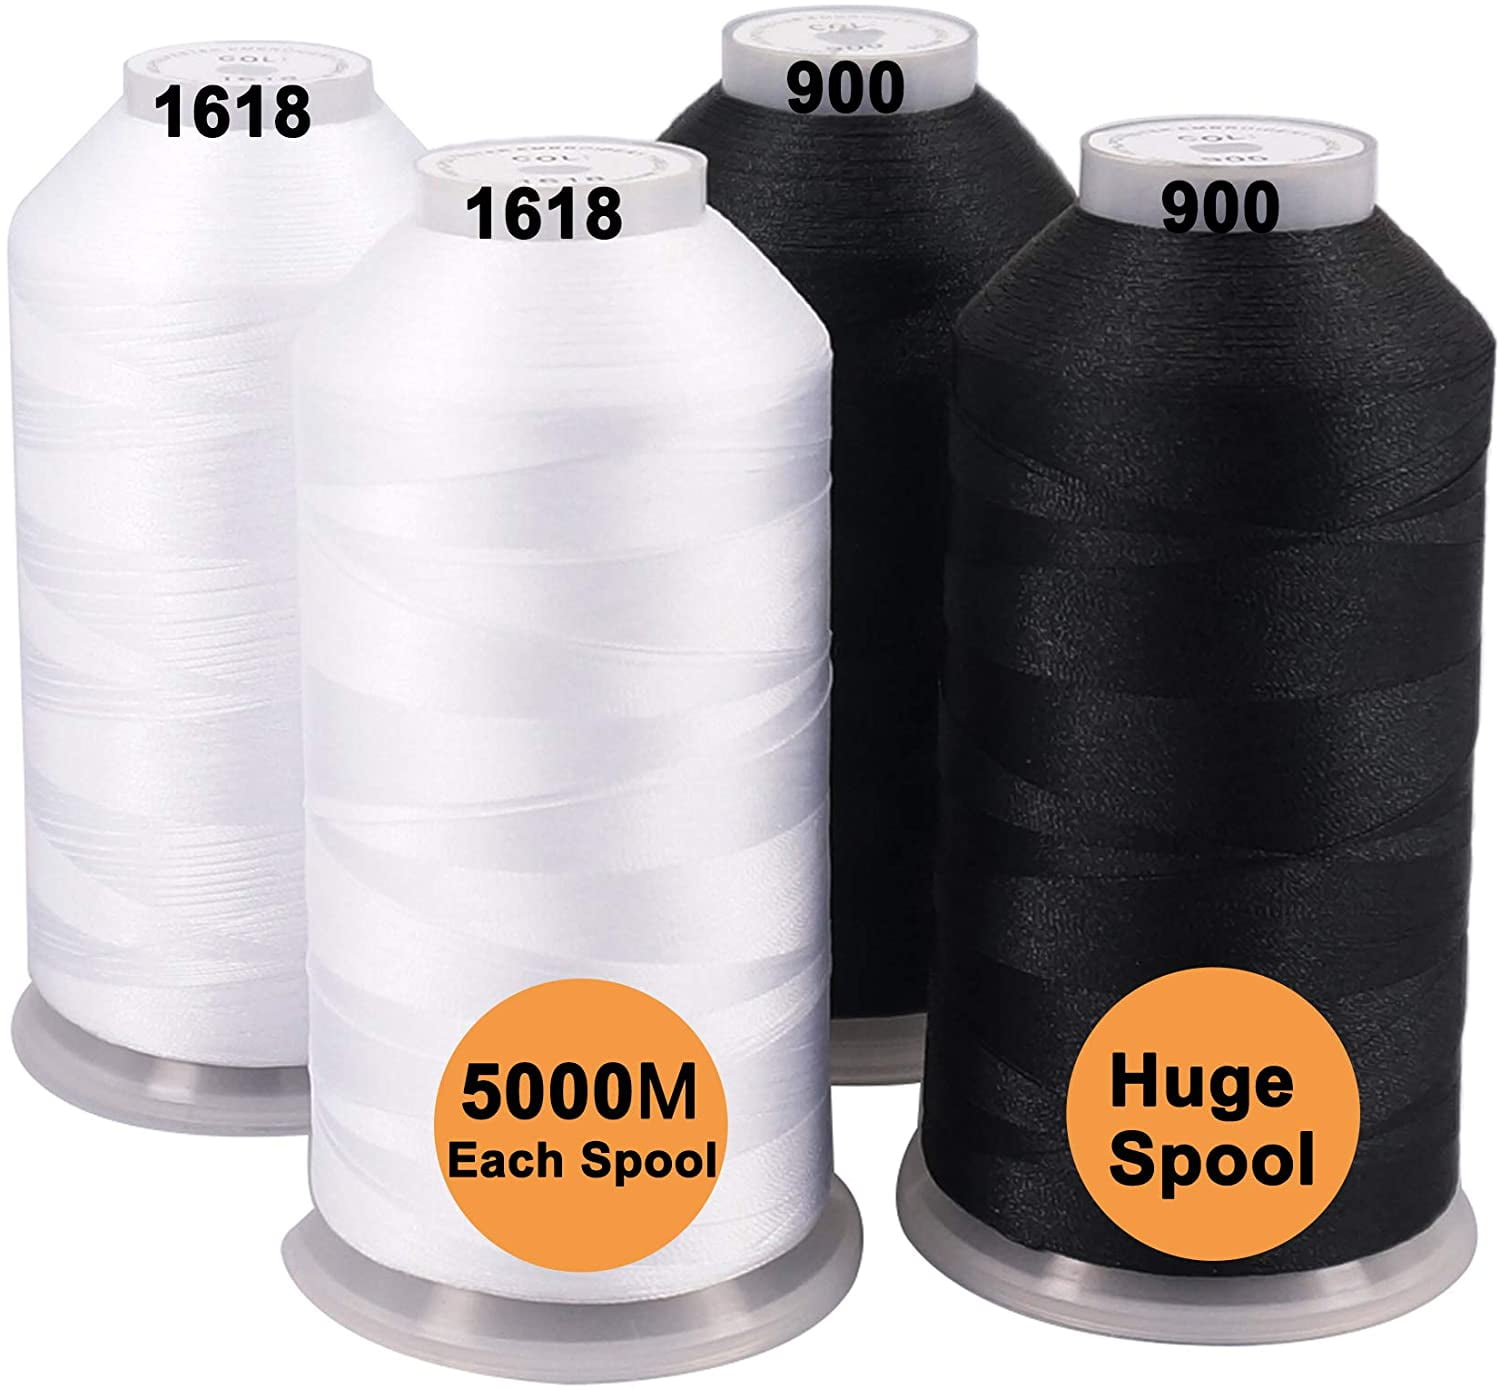 New brothread - Single Huge Spool 5000M Each Polyester Embroidery Machine  Thread 40WT for Commercial and Domestic Machines - Black